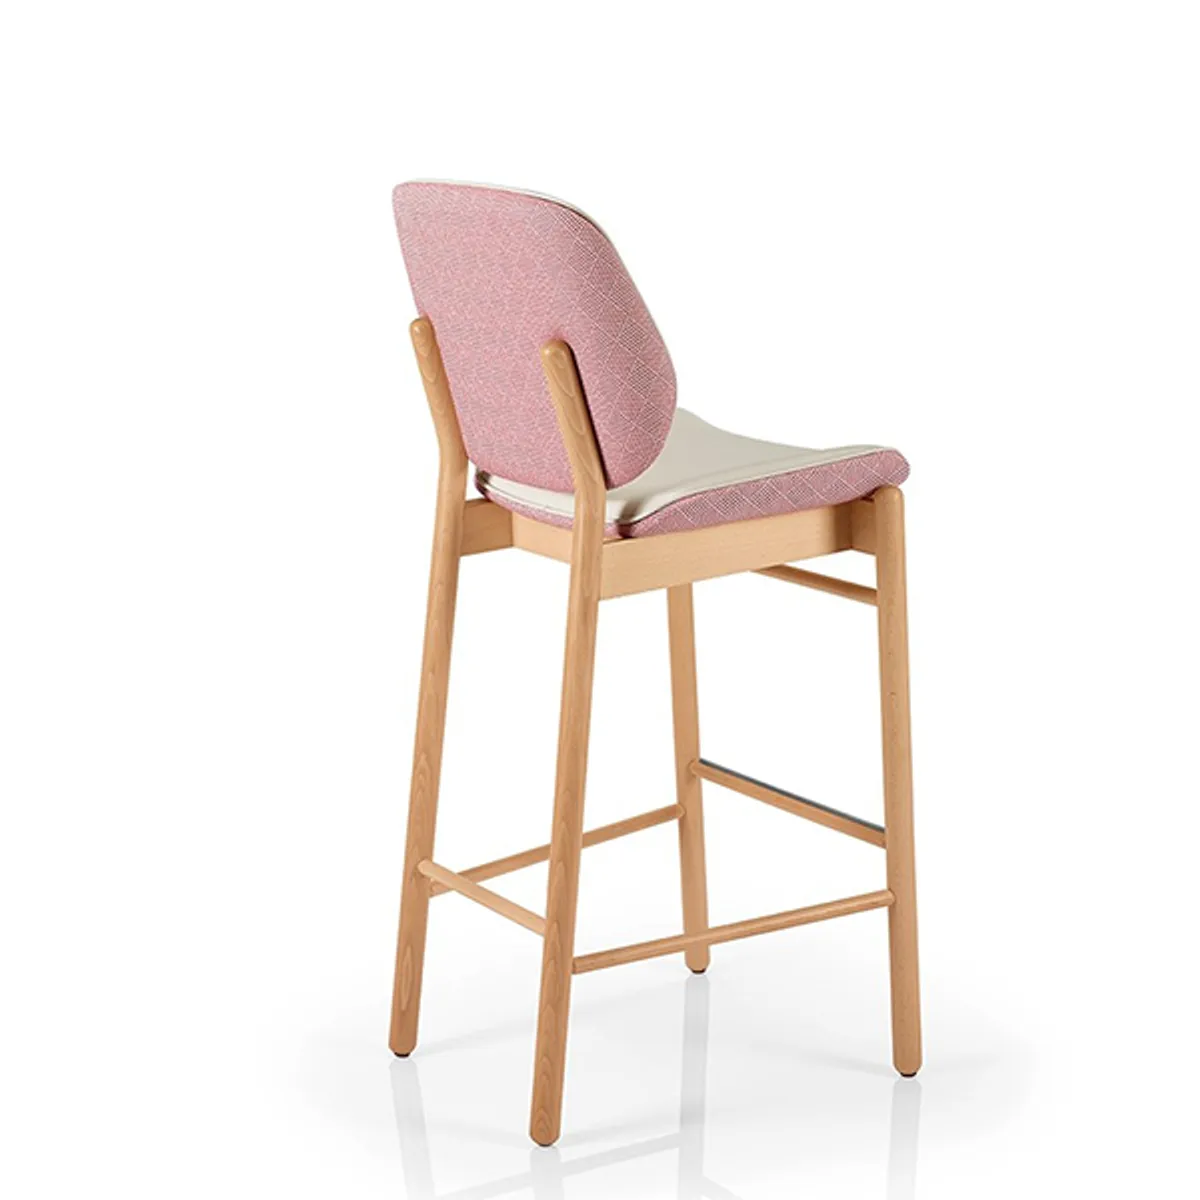 Peggy Bar Stool Hotel Furniture Suppliers Inside Out Contracts 020